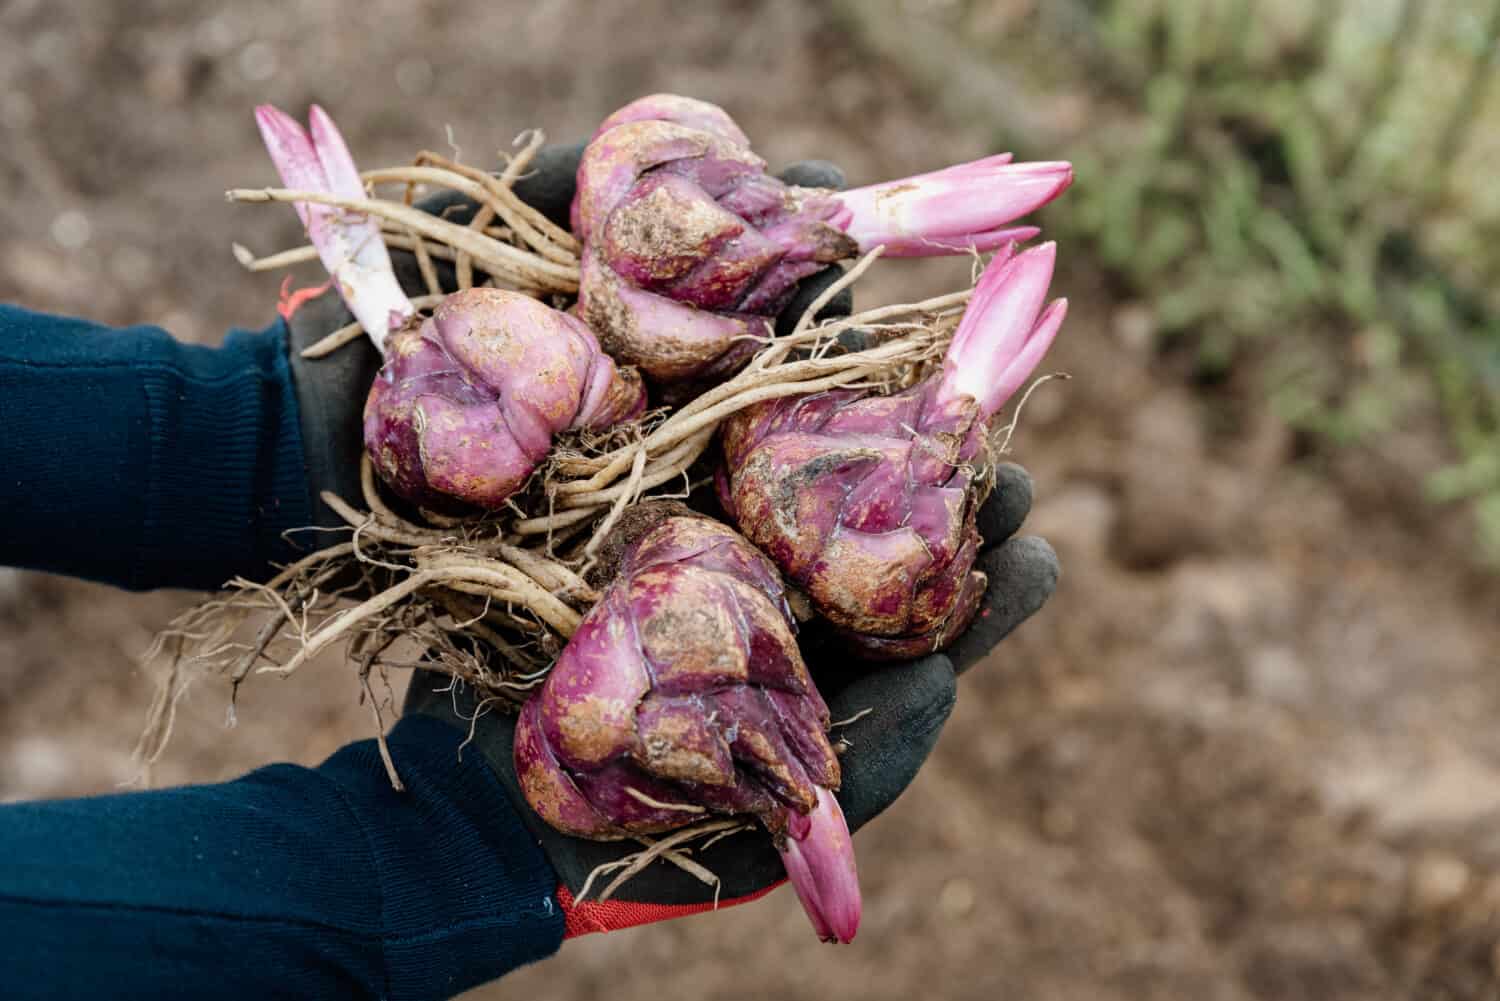 Close up of many lily bulbs on woman's hands ready for planting in spring garden. Purple flower bulbs sprouting in springtime season